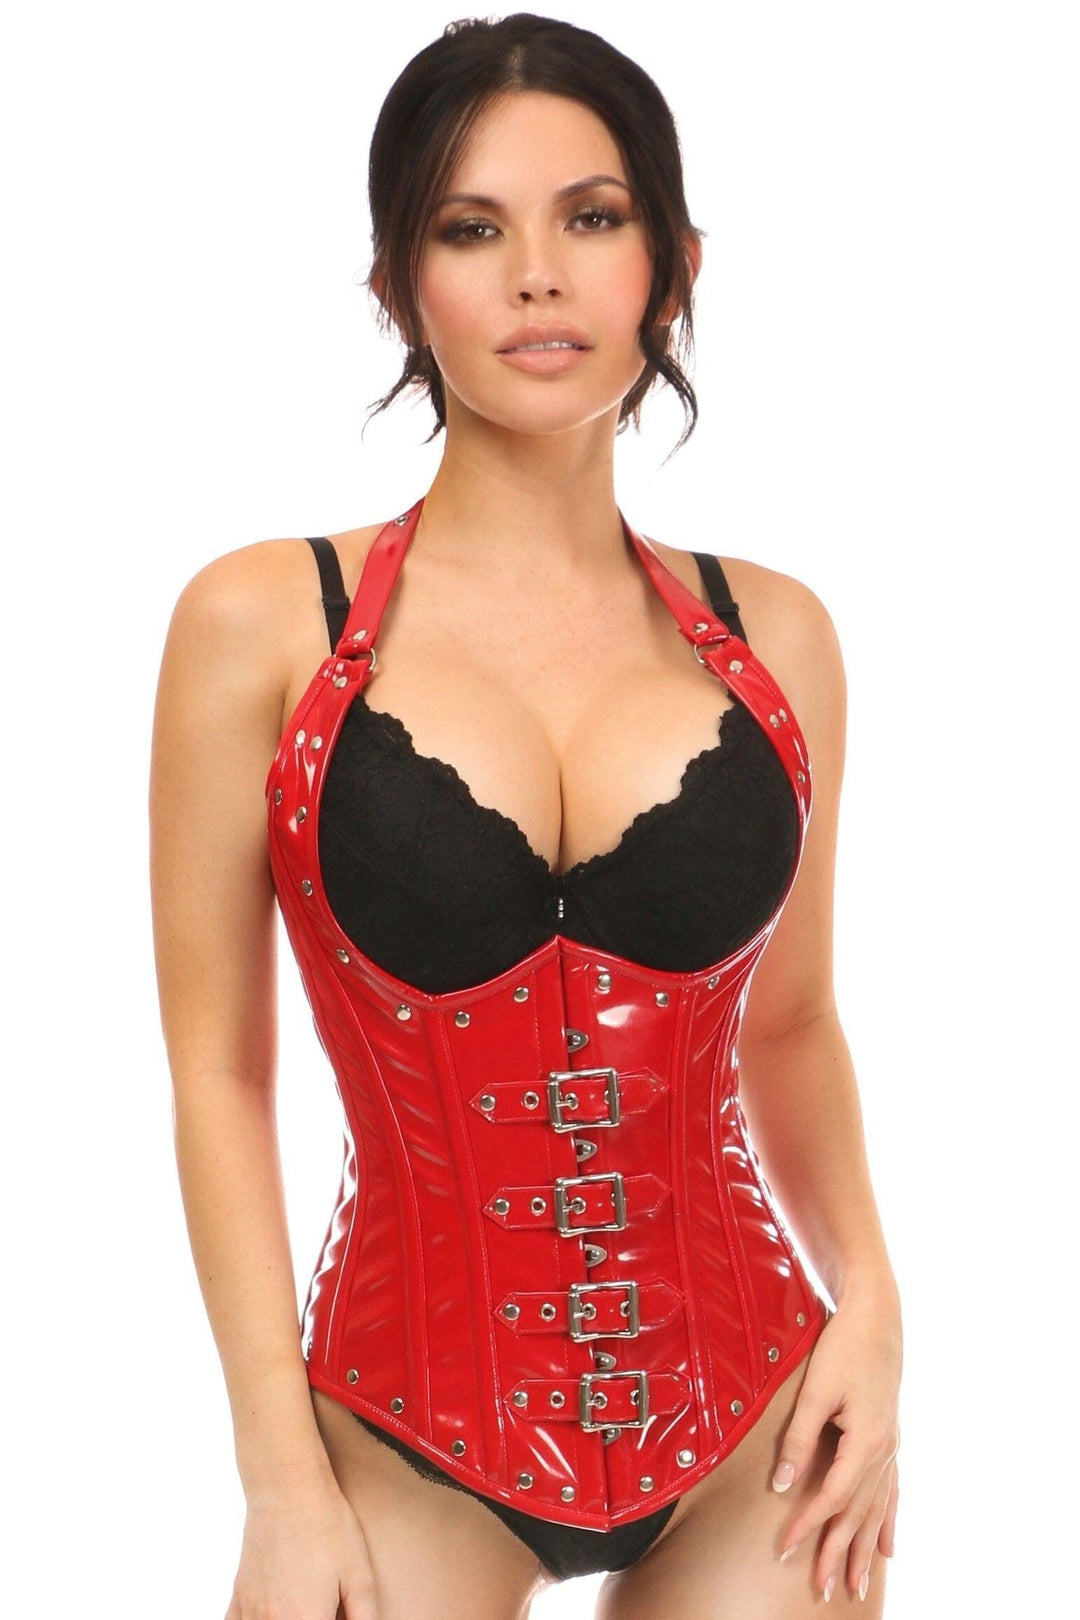 Top Drawer Steel Boned Red Patent PVC Vinyl Underbust Corset Top-Underbust Corsets-Daisy Corsets-Red-2X-SEXYSHOES.COM